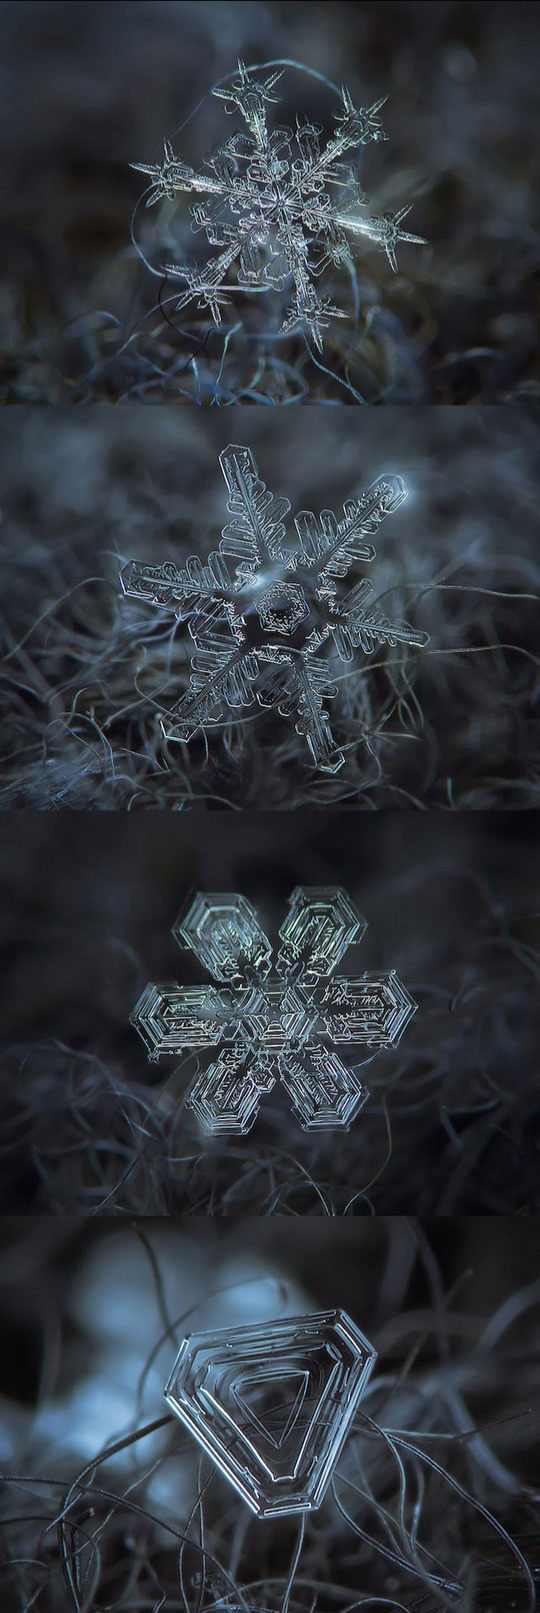 cool-snowflake-microscope-different